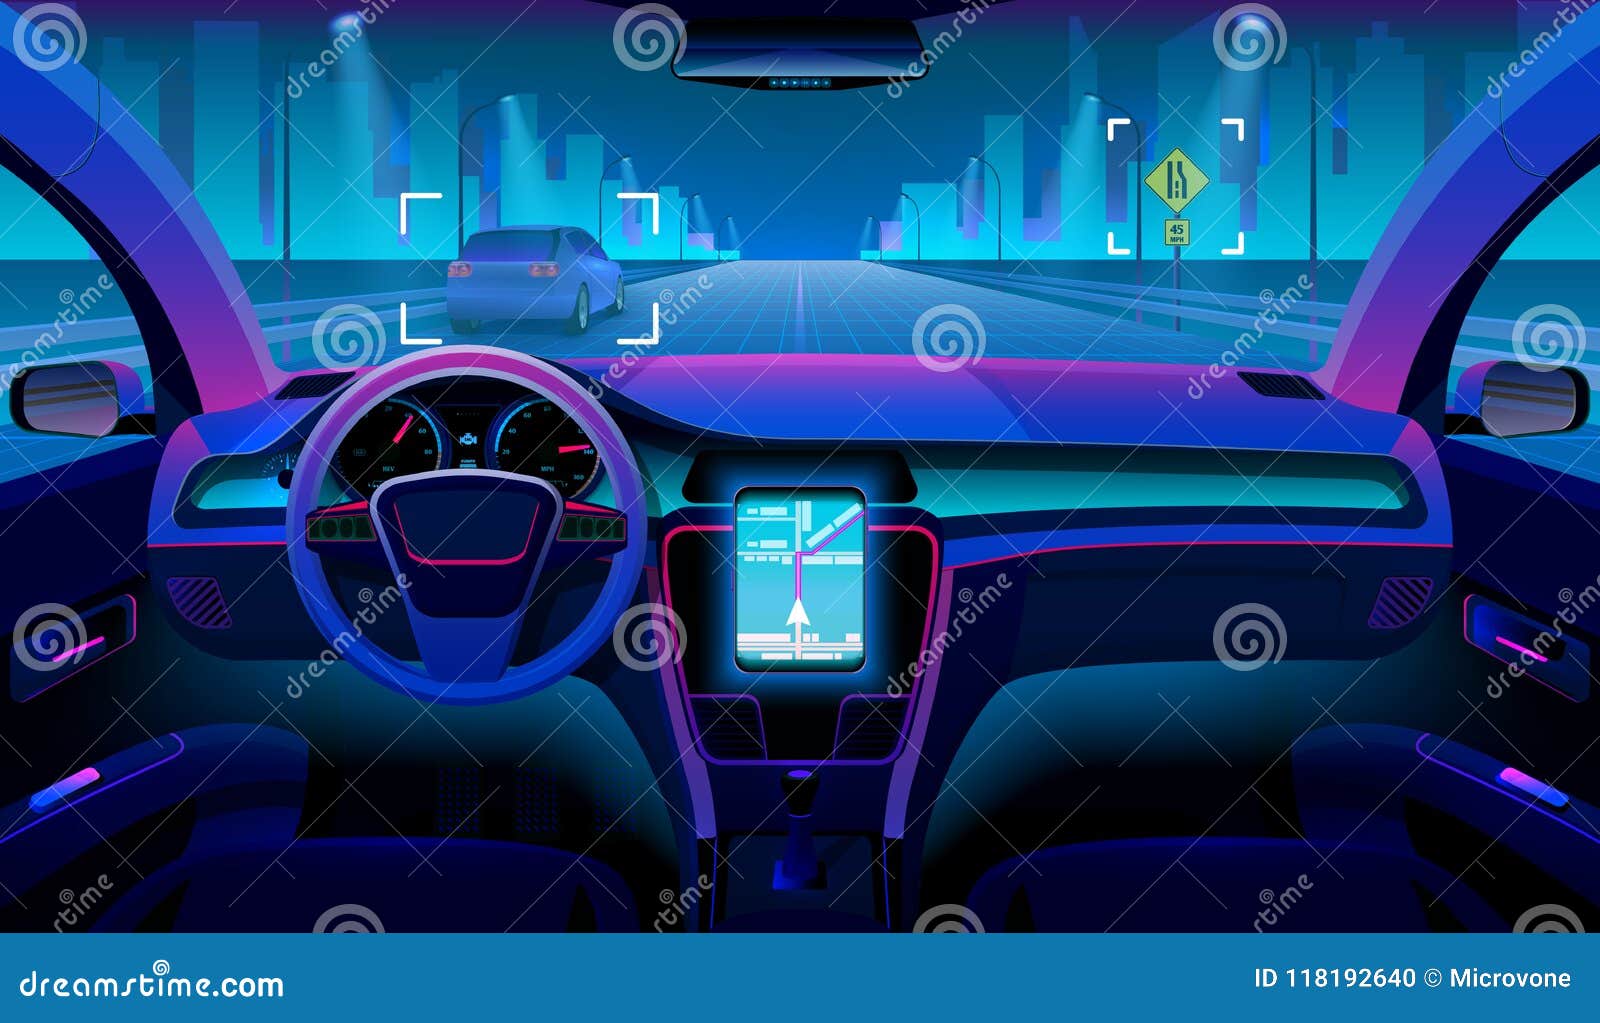 future autonomous vehicle, driverless car interior with obstacles and night landscape outside. futuristic car assistant